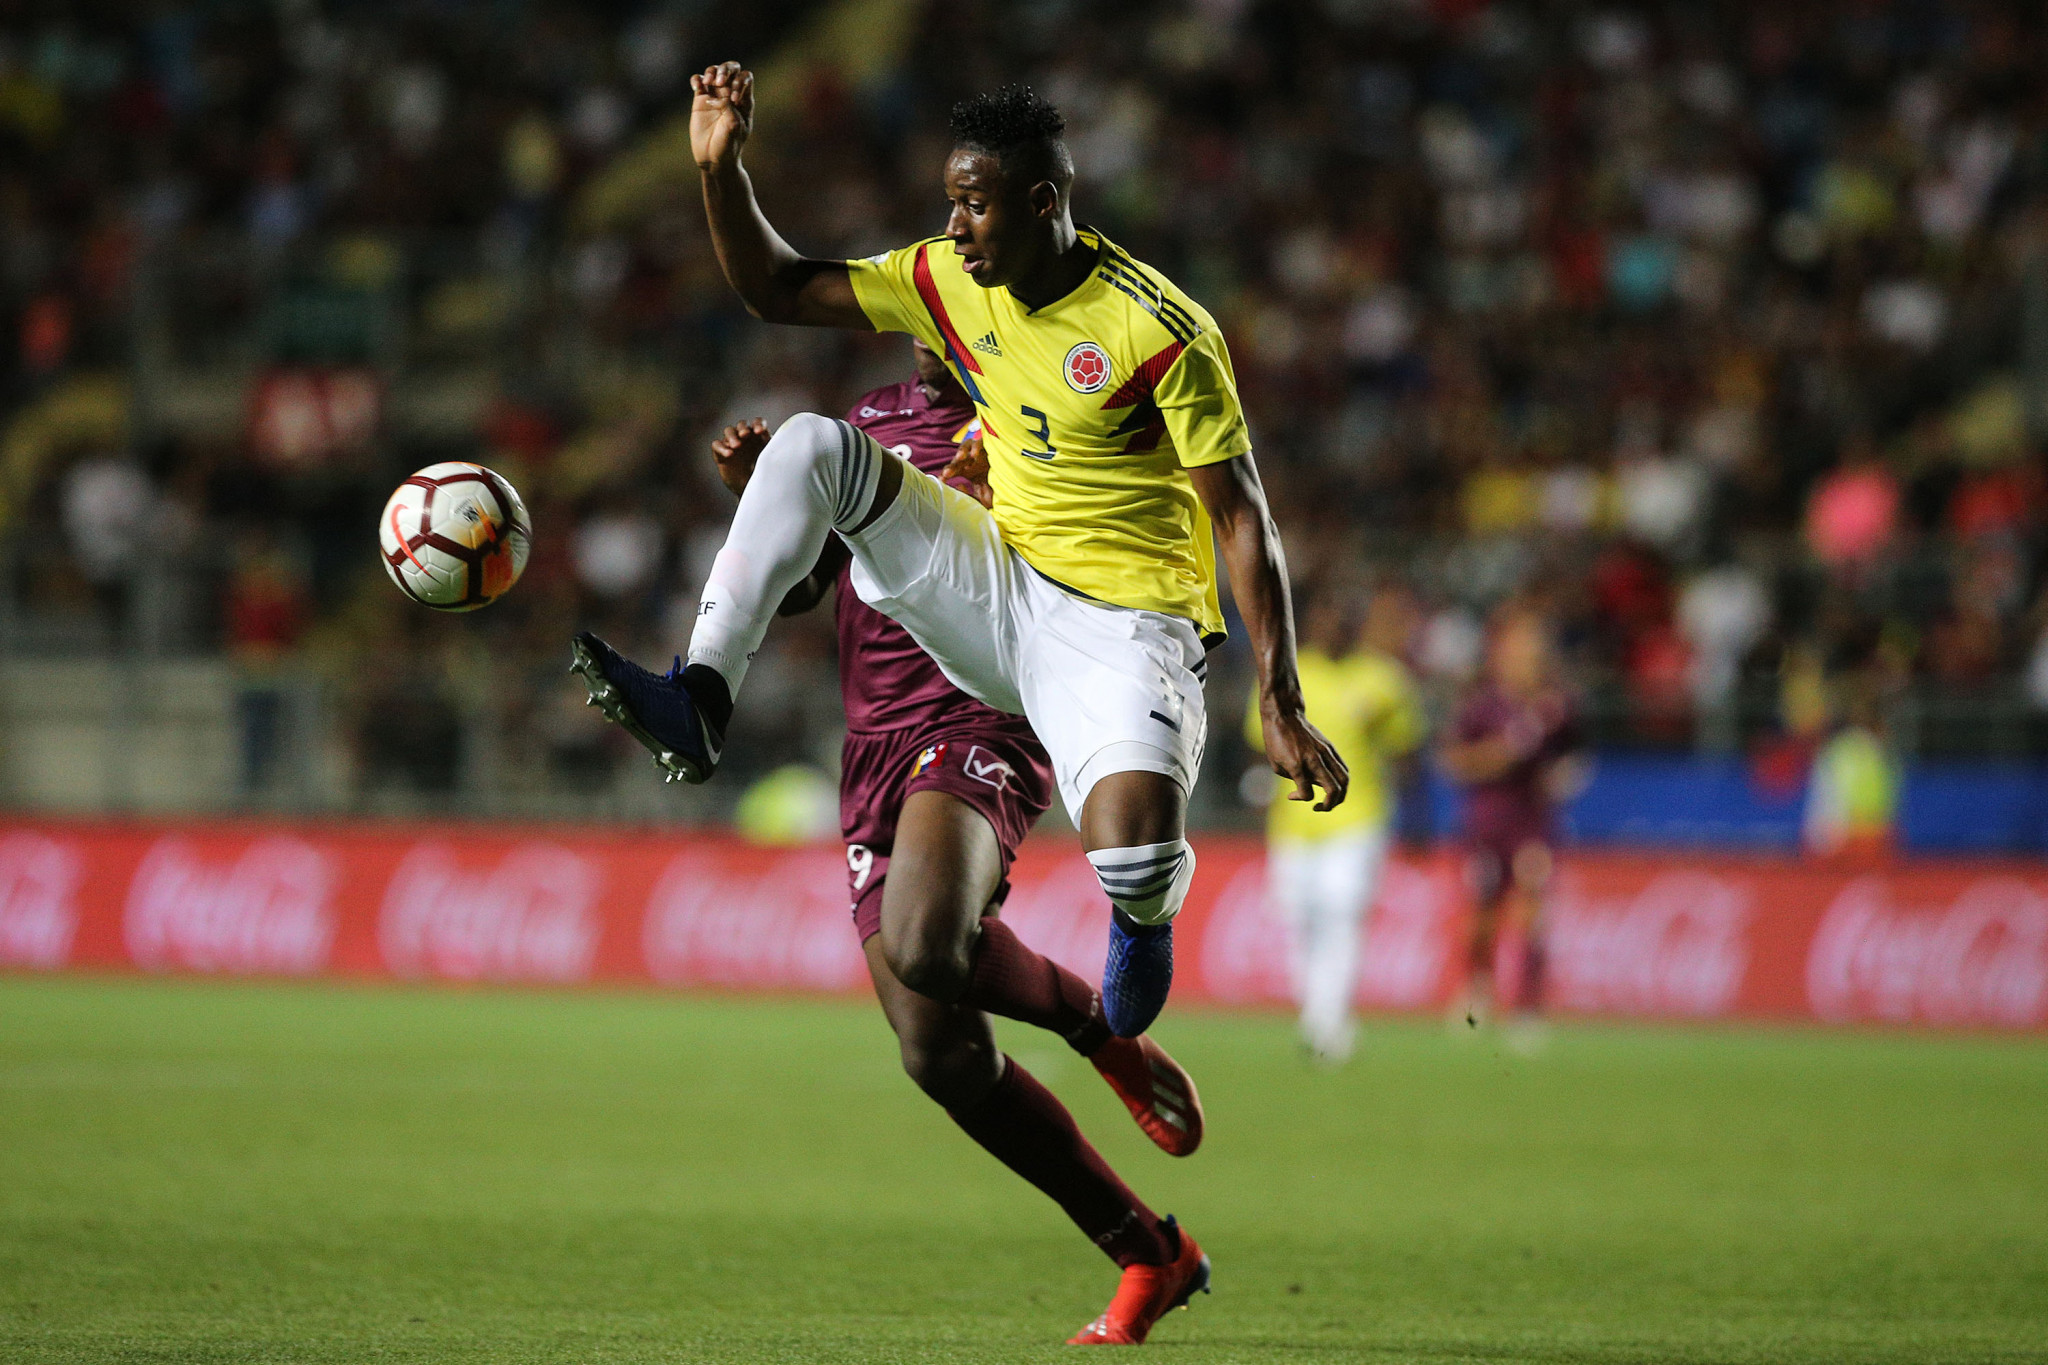 Andres Reyes scored Colombia's opener against New Zealand ©Getty Images